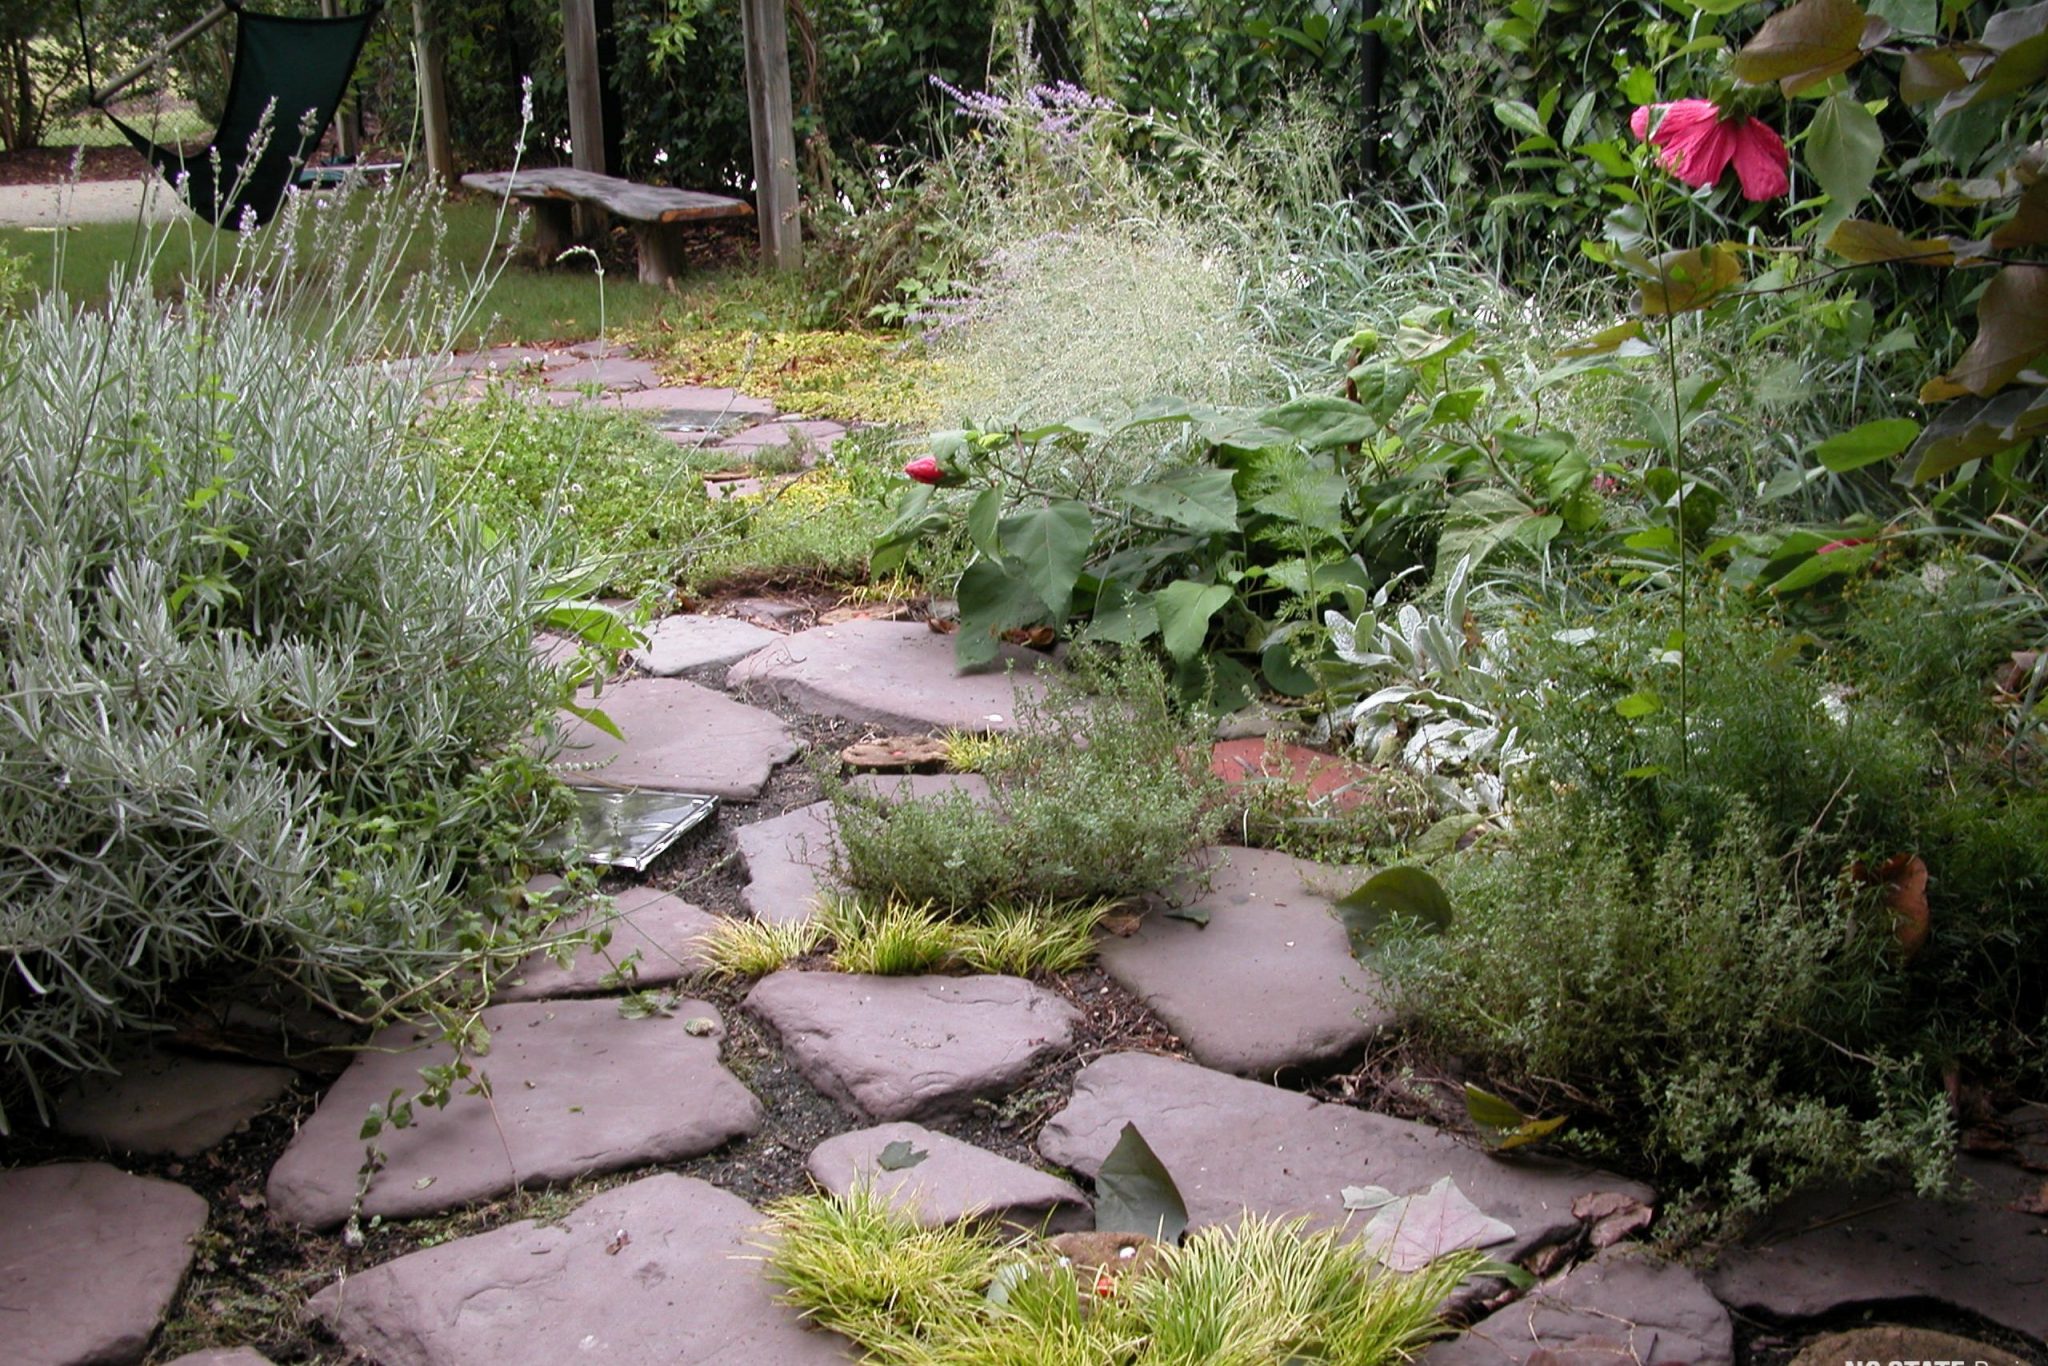 installed stepping stone pathway in between plants